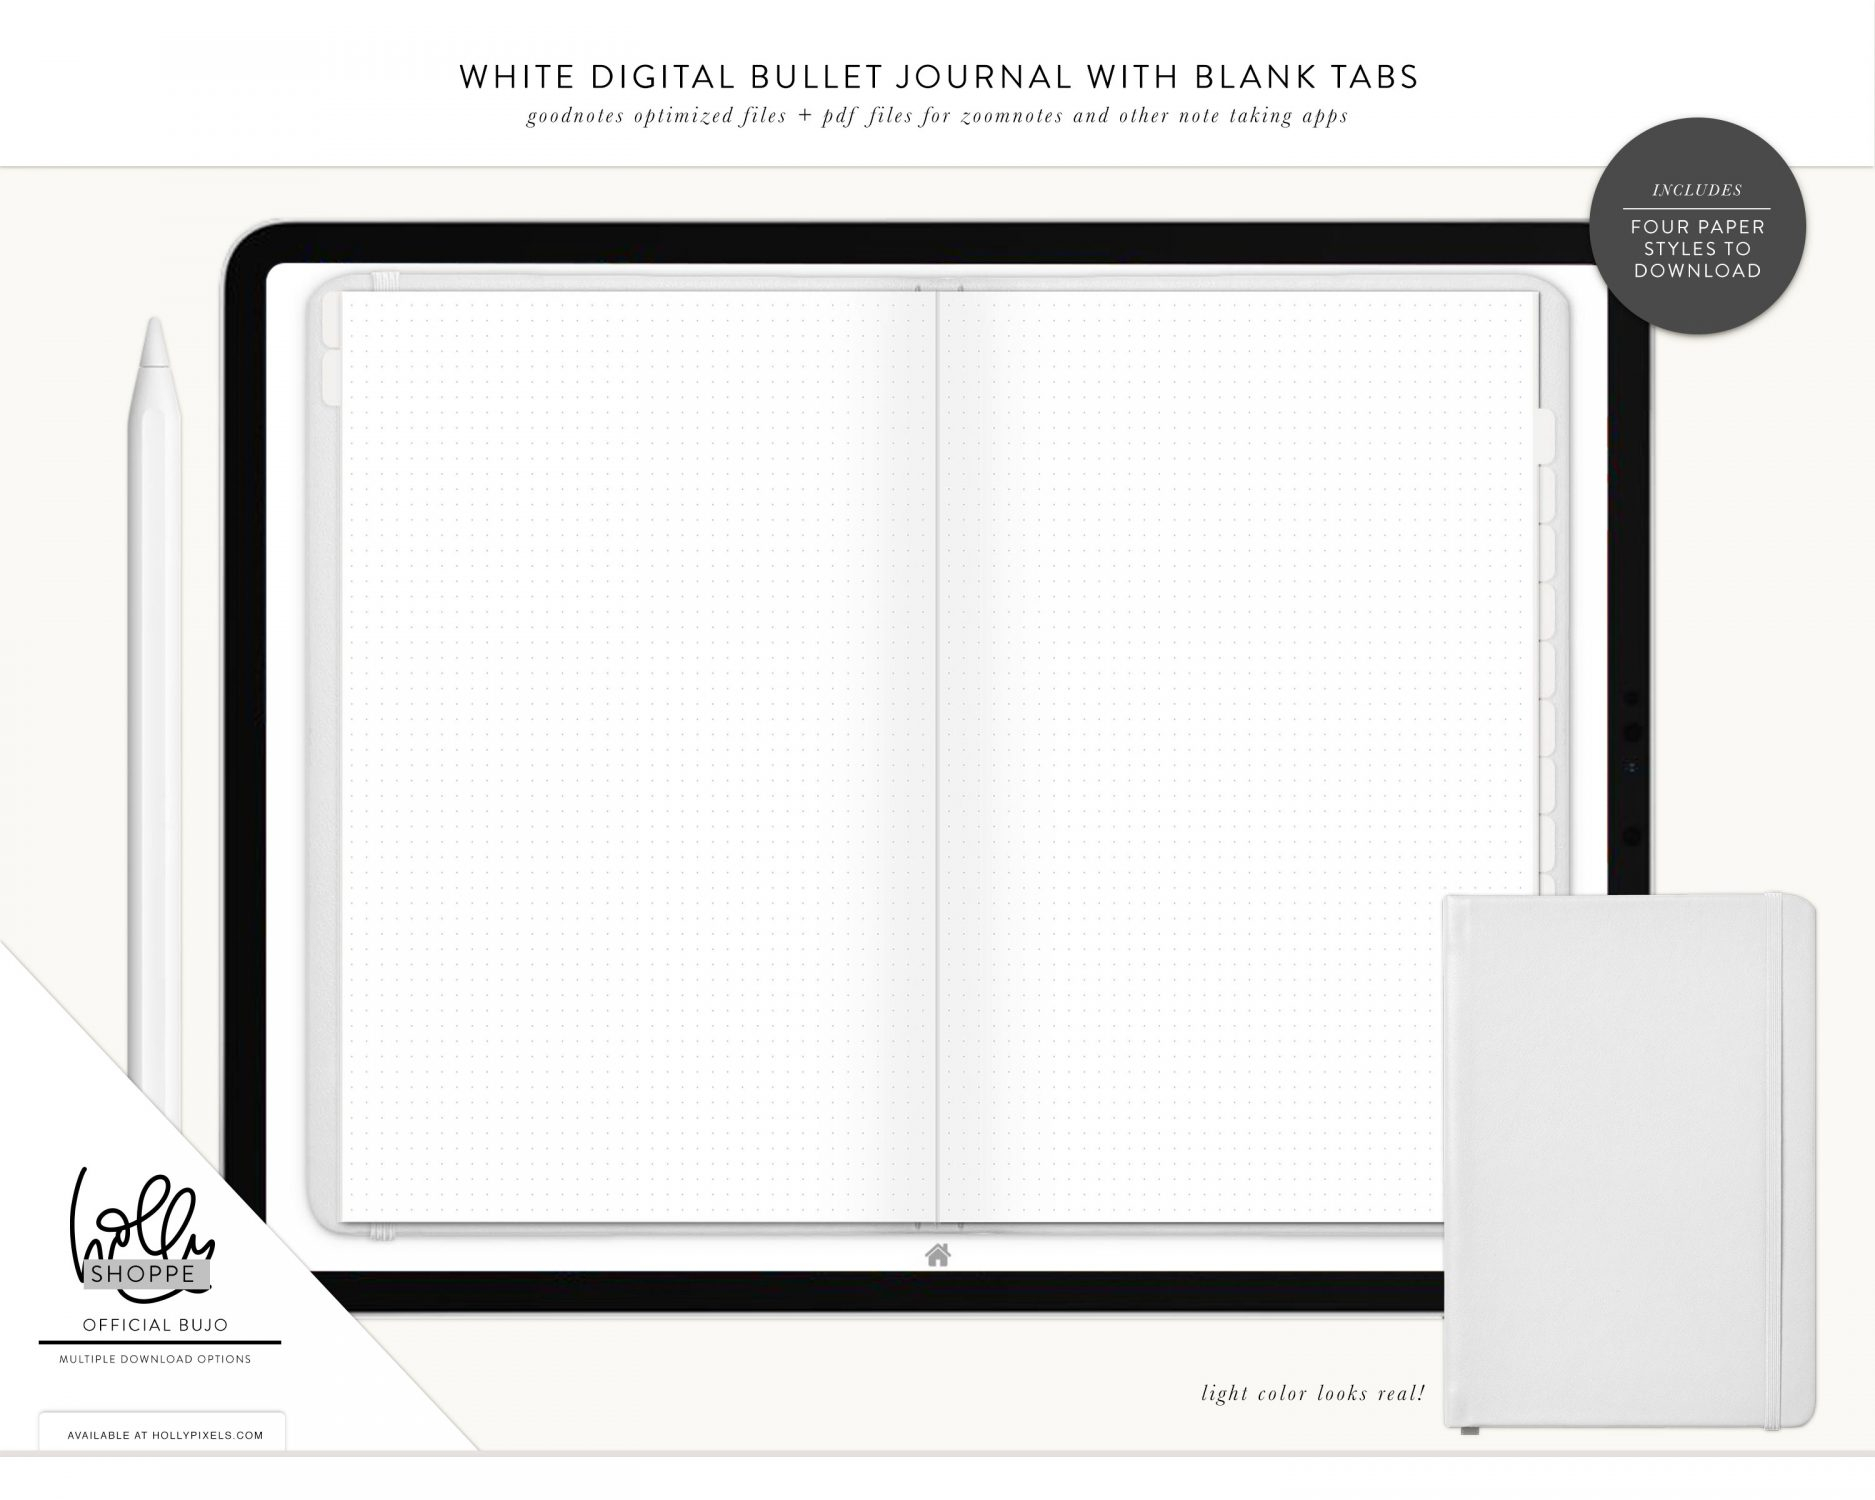 Digital Blank Bullet Journal White Cover By Holly Pixels with regard to Blank Instagram Template 2018